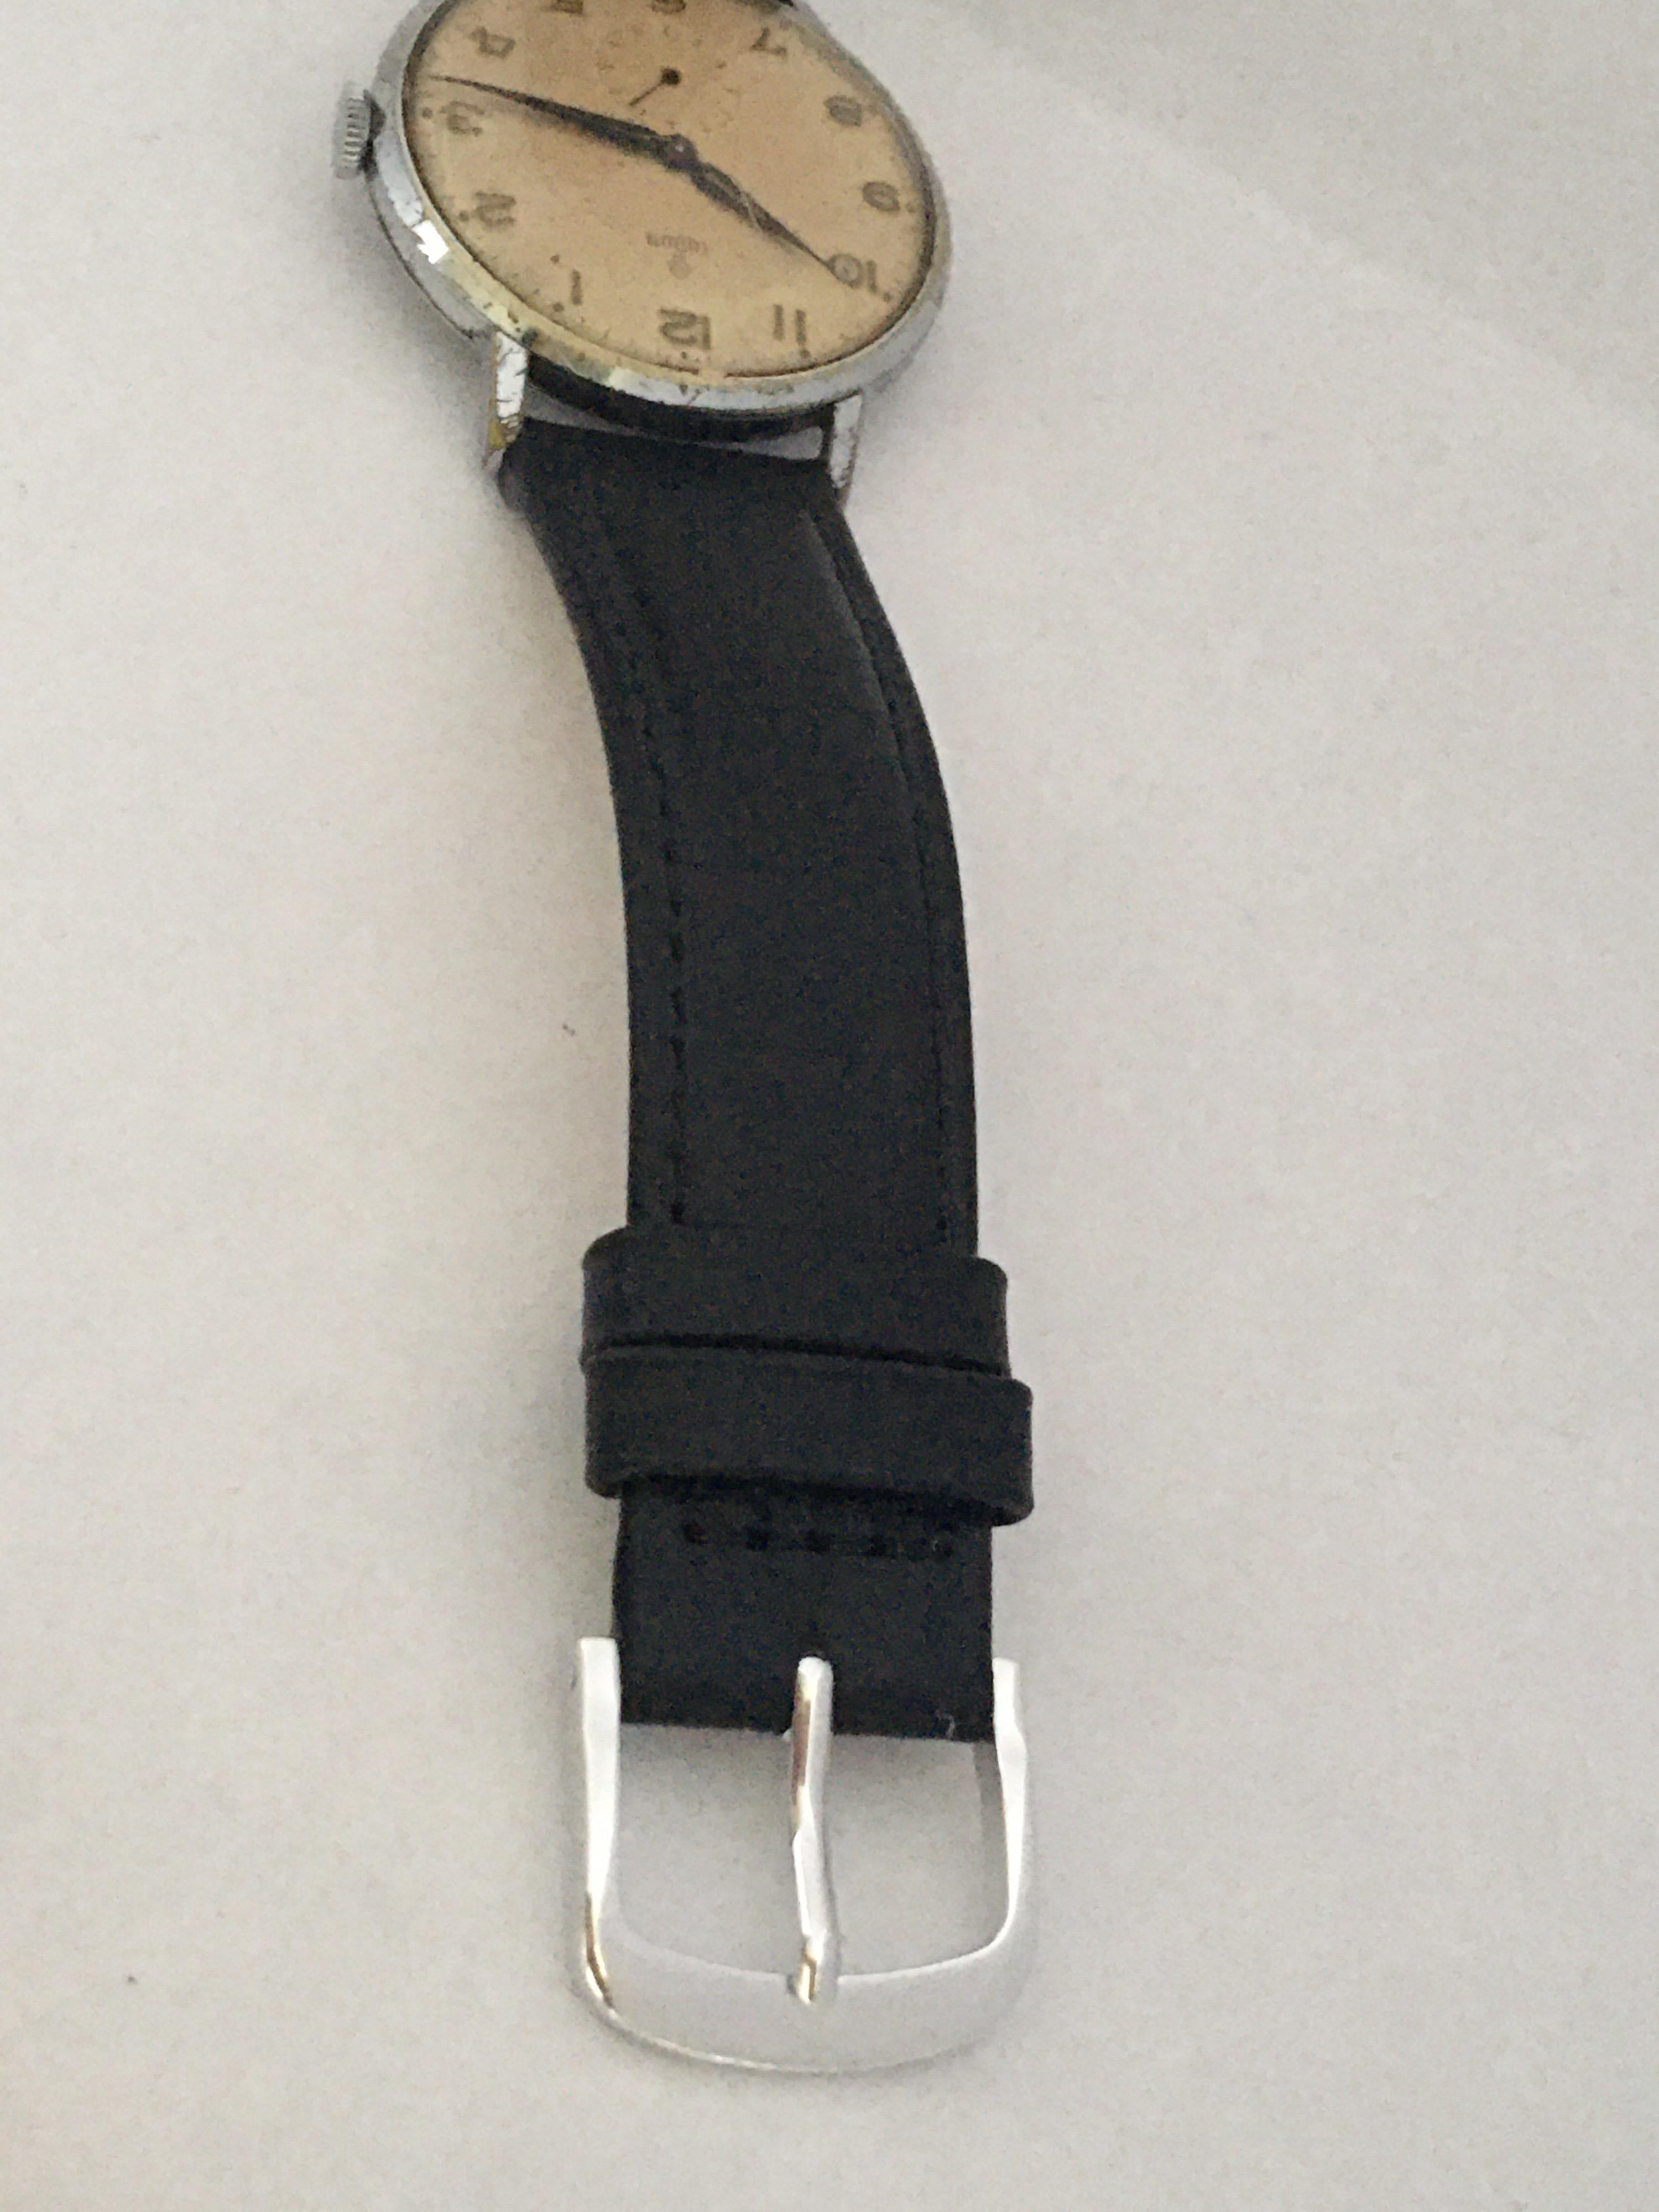 Vintage 1940s Tudor Mechanical Watch In Good Condition For Sale In Carlisle, GB